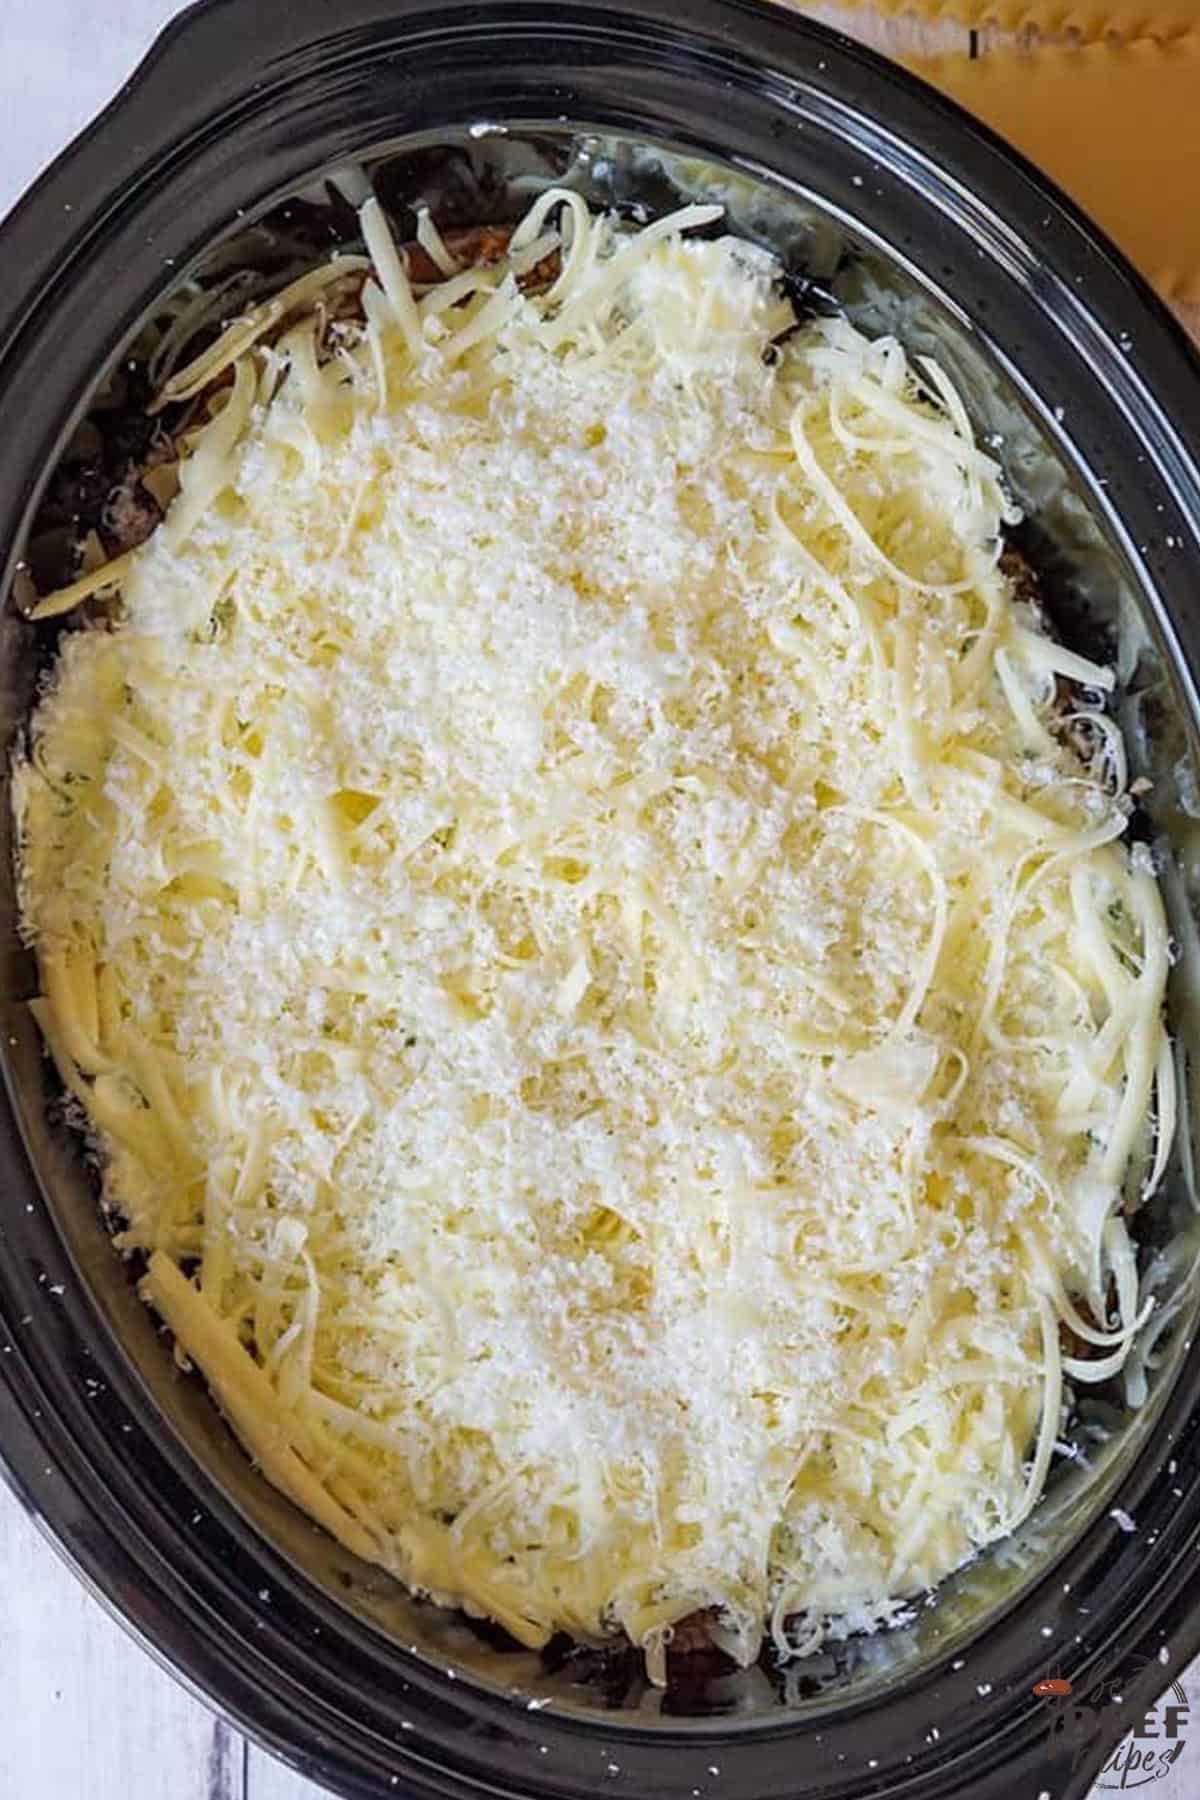 A layer of mozzarella cheese in the slow cooker